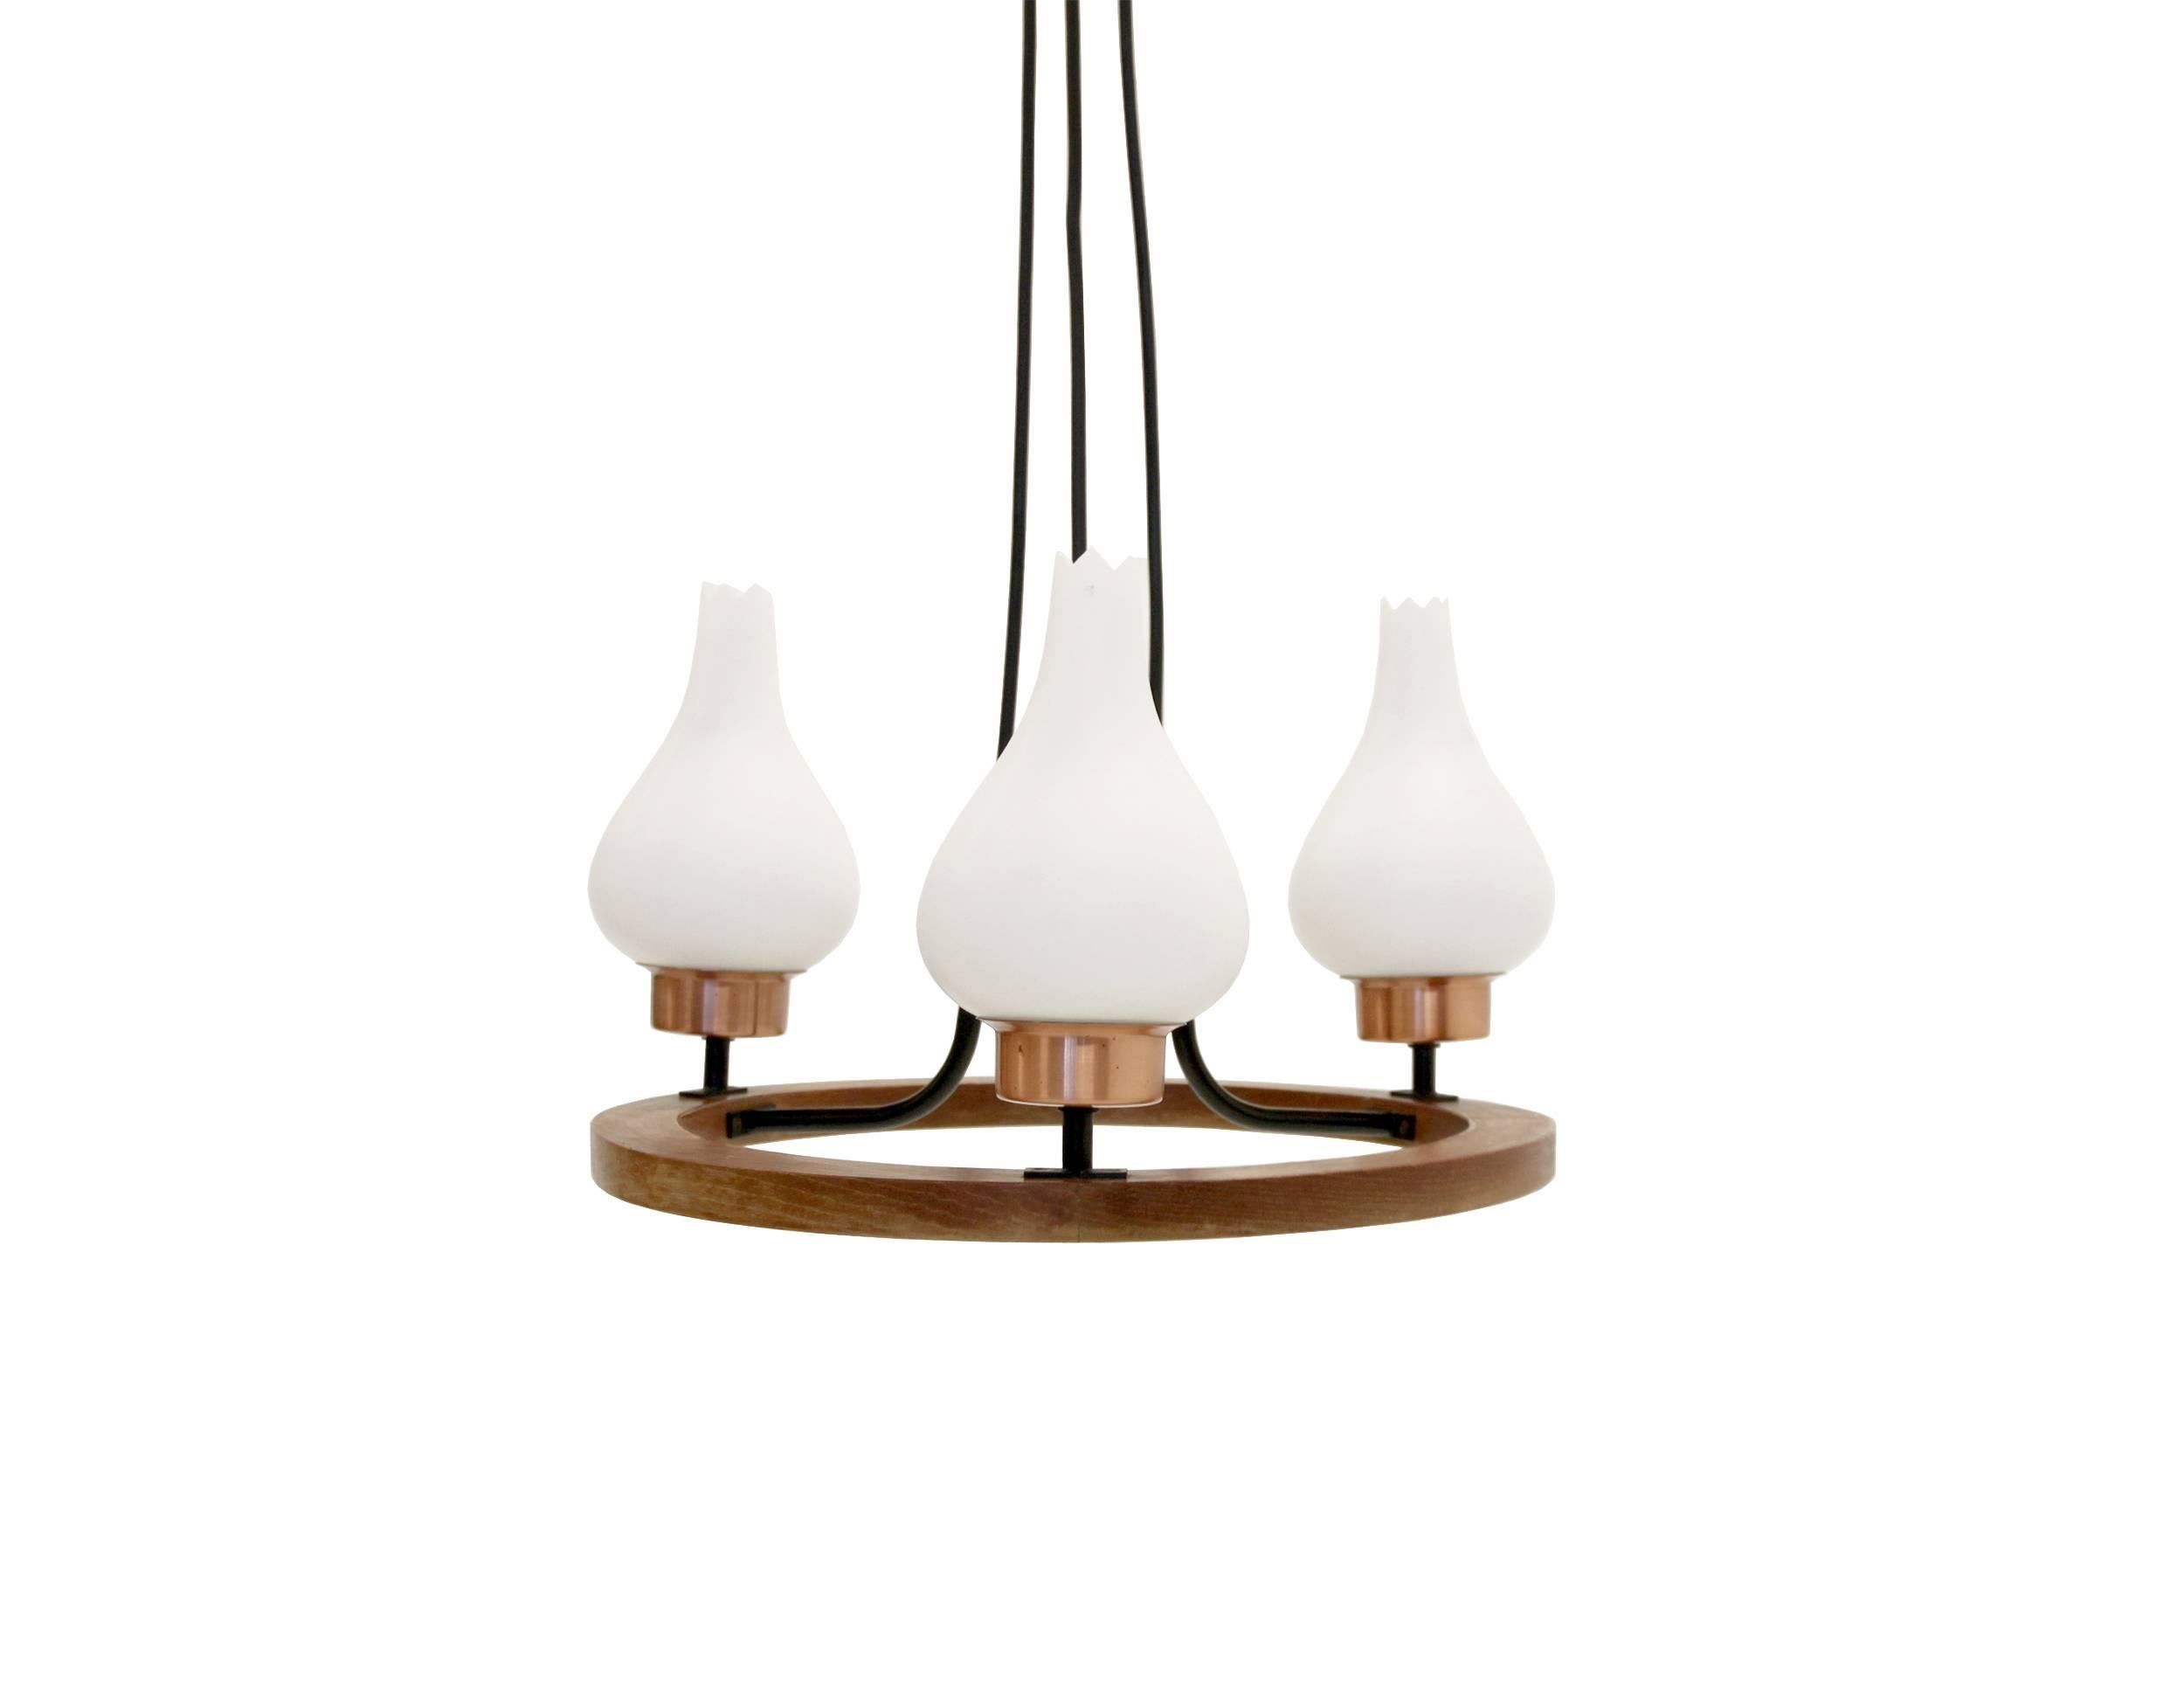 Remarkable and well made chandelier on a teak frame with three opaline glass shades.

Most likely designed and manufactured in Norway, circa 1960s second half.

The lamp is fully working and in good vintage condition.